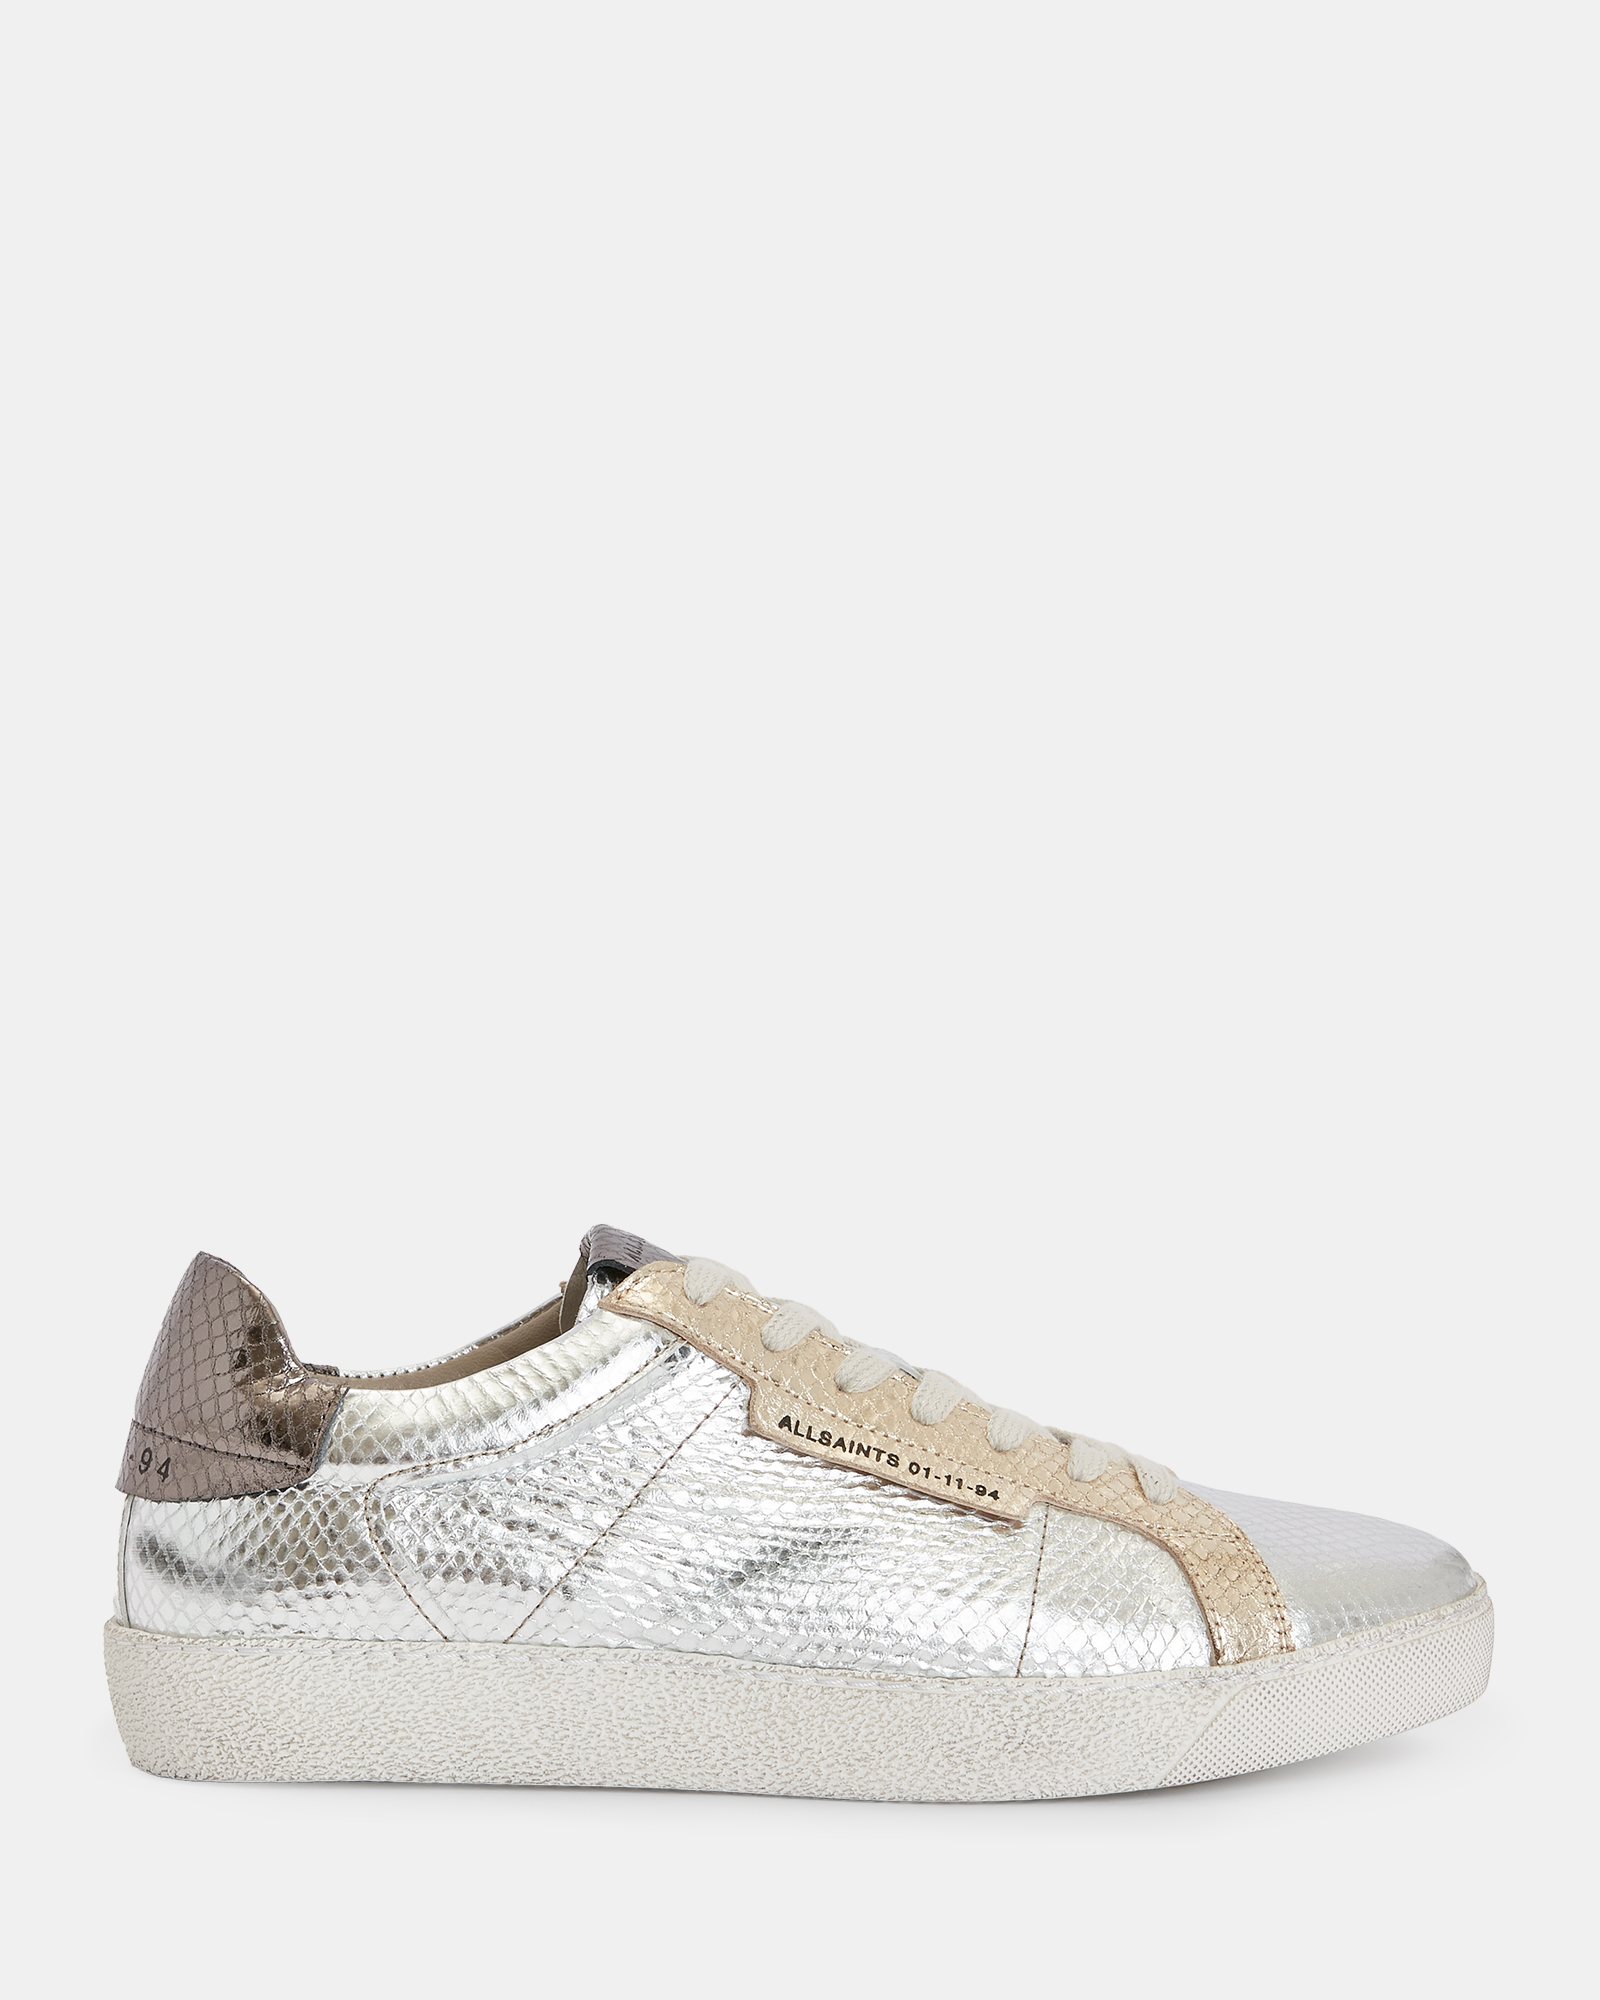 AllSaints Sheer Metallic Leather Trainers